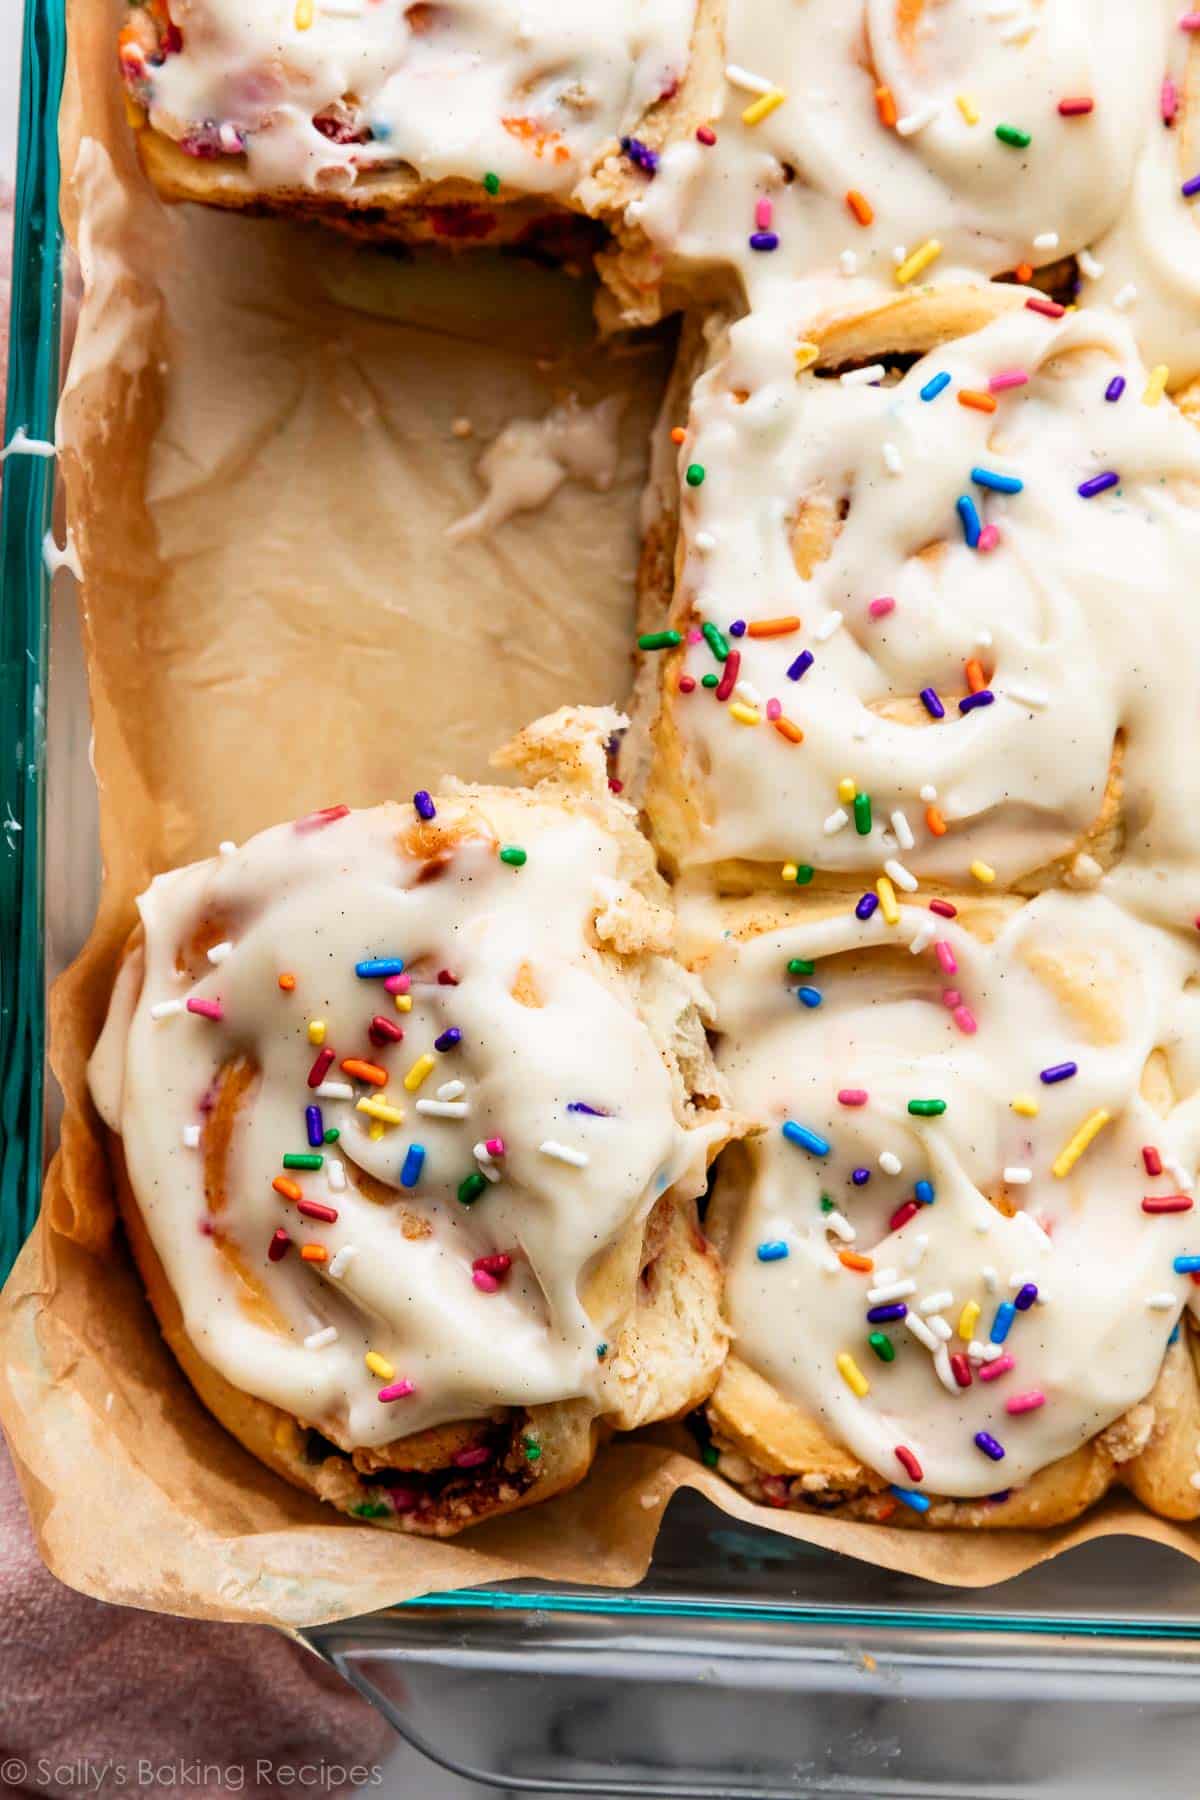 birthday cake cinnamon rolls with icing in parchment paper-lined pan.